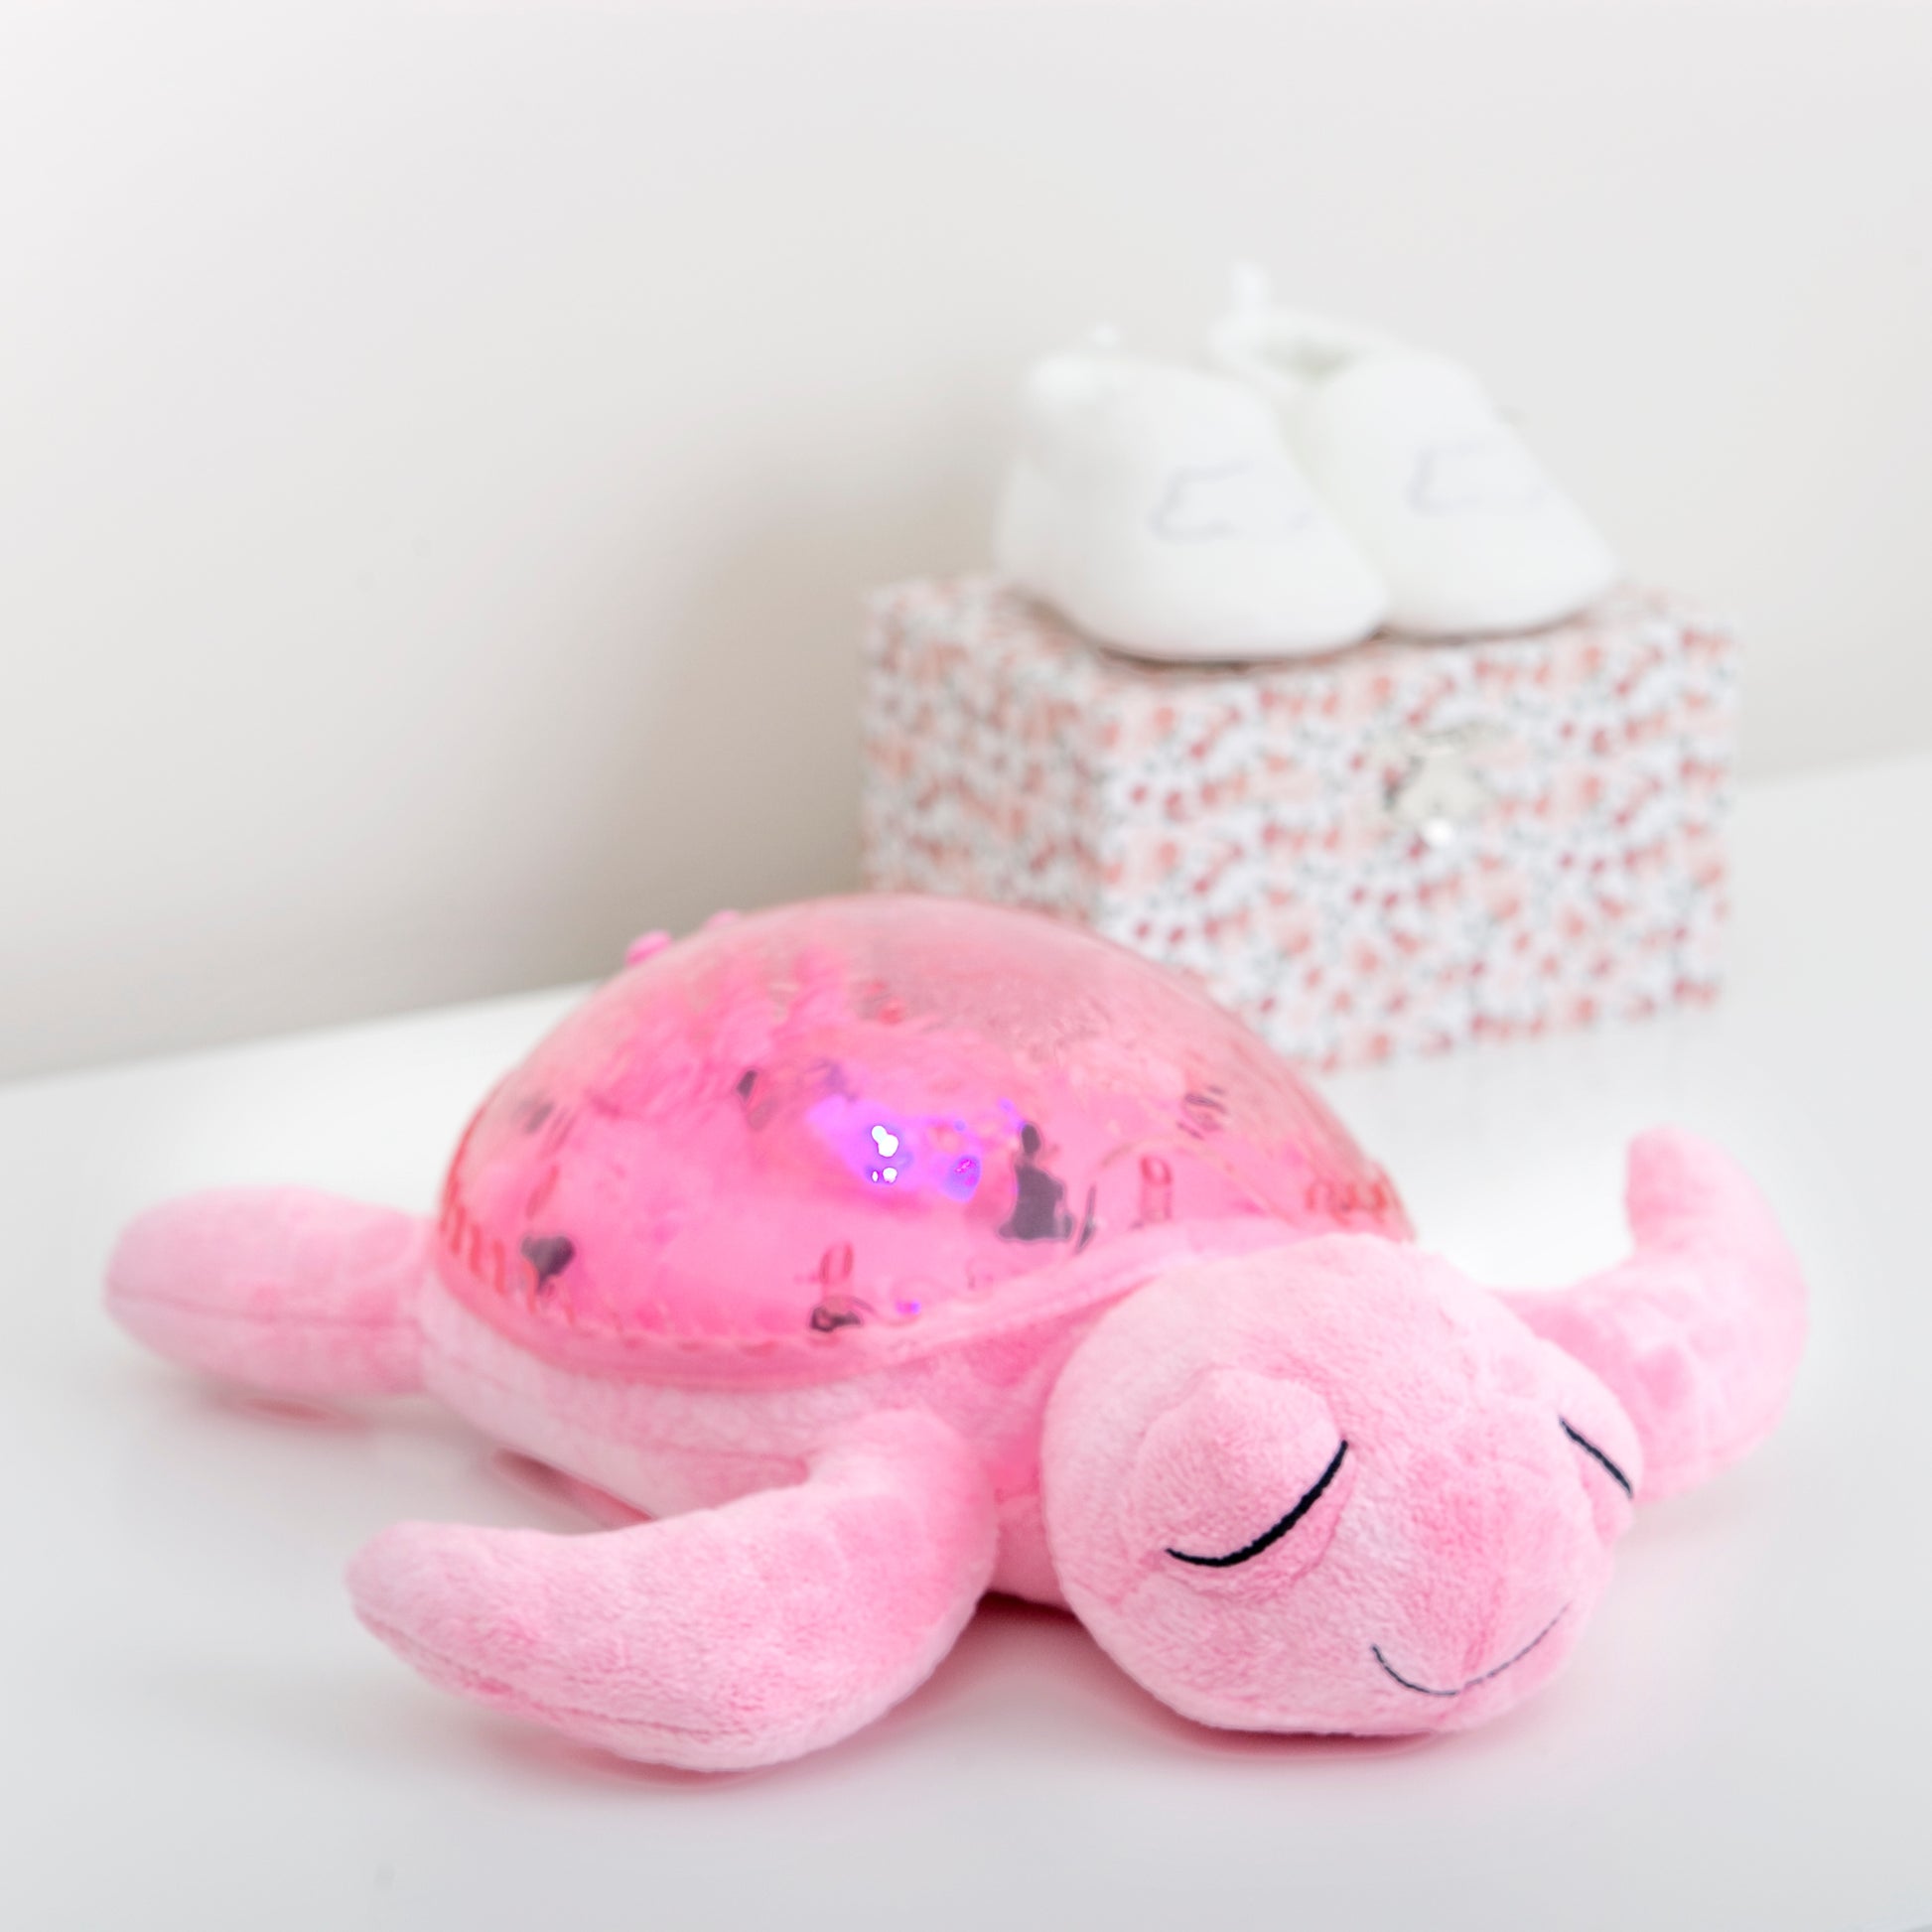 Tranquil Turtle - Soothing Projector Nightlight Pink-Cloud B-Do-Gree Generations